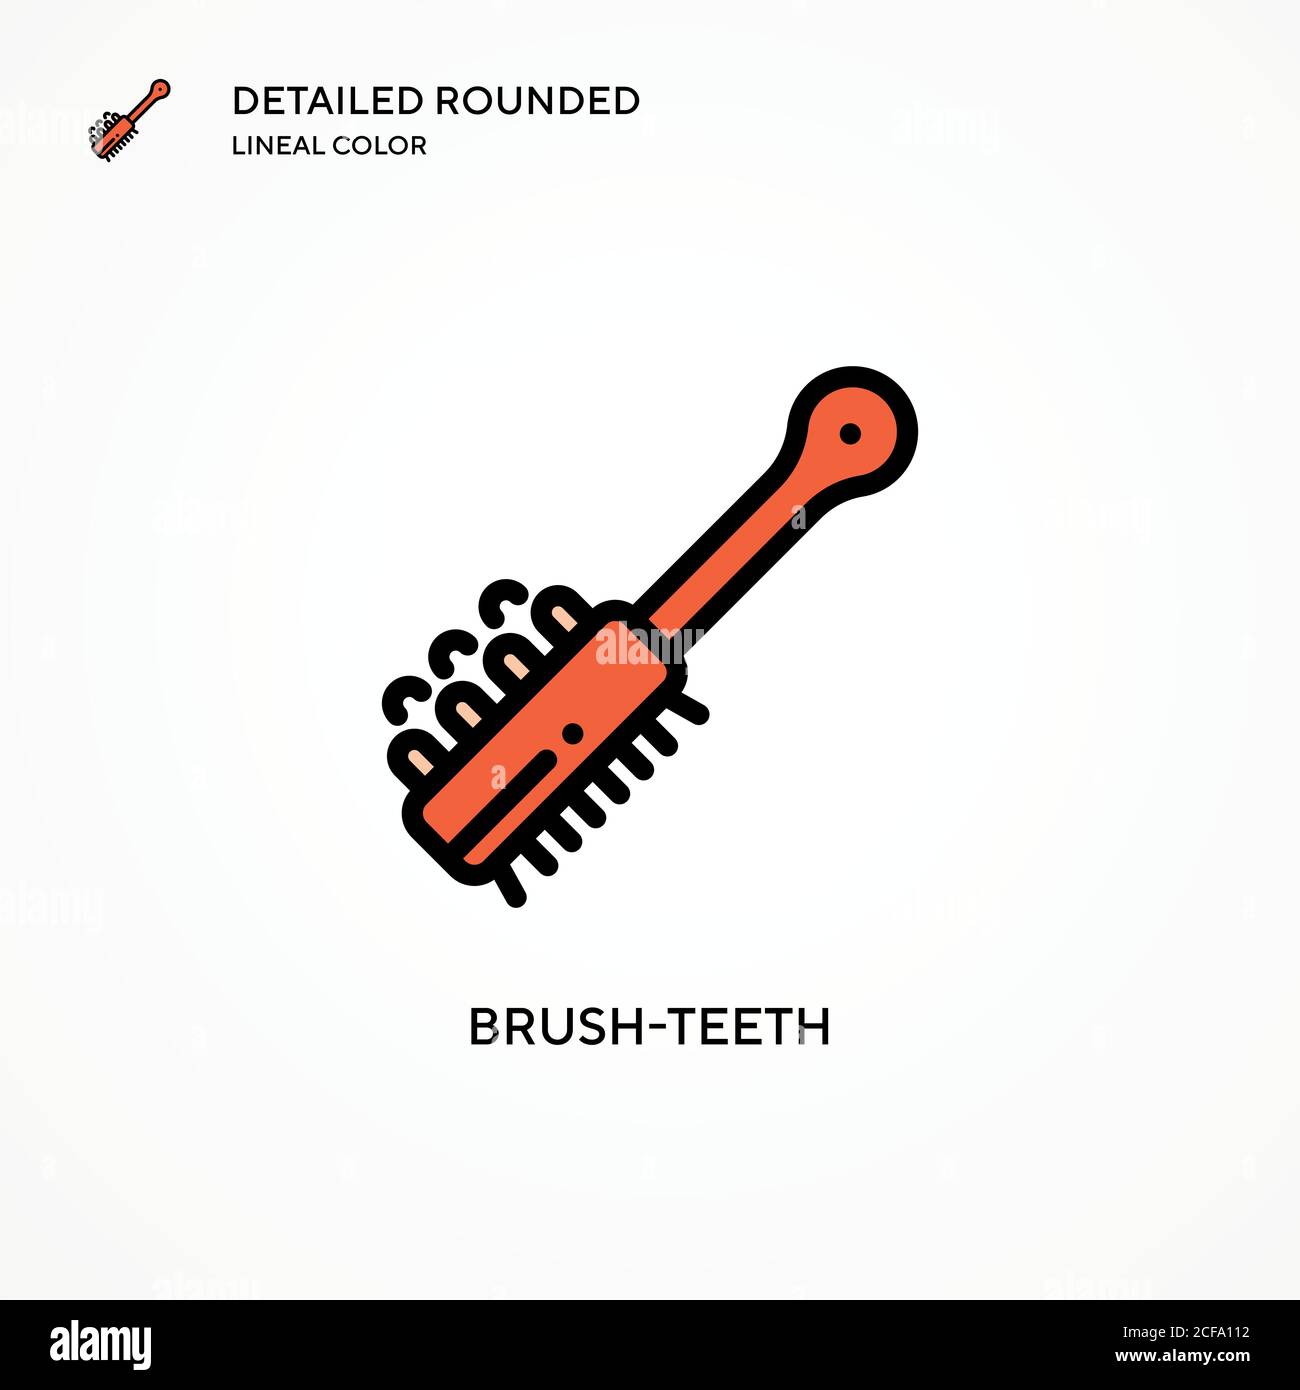 Brush-teeth vector icon. Modern vector illustration concepts. Easy to edit and customize. Stock Vector